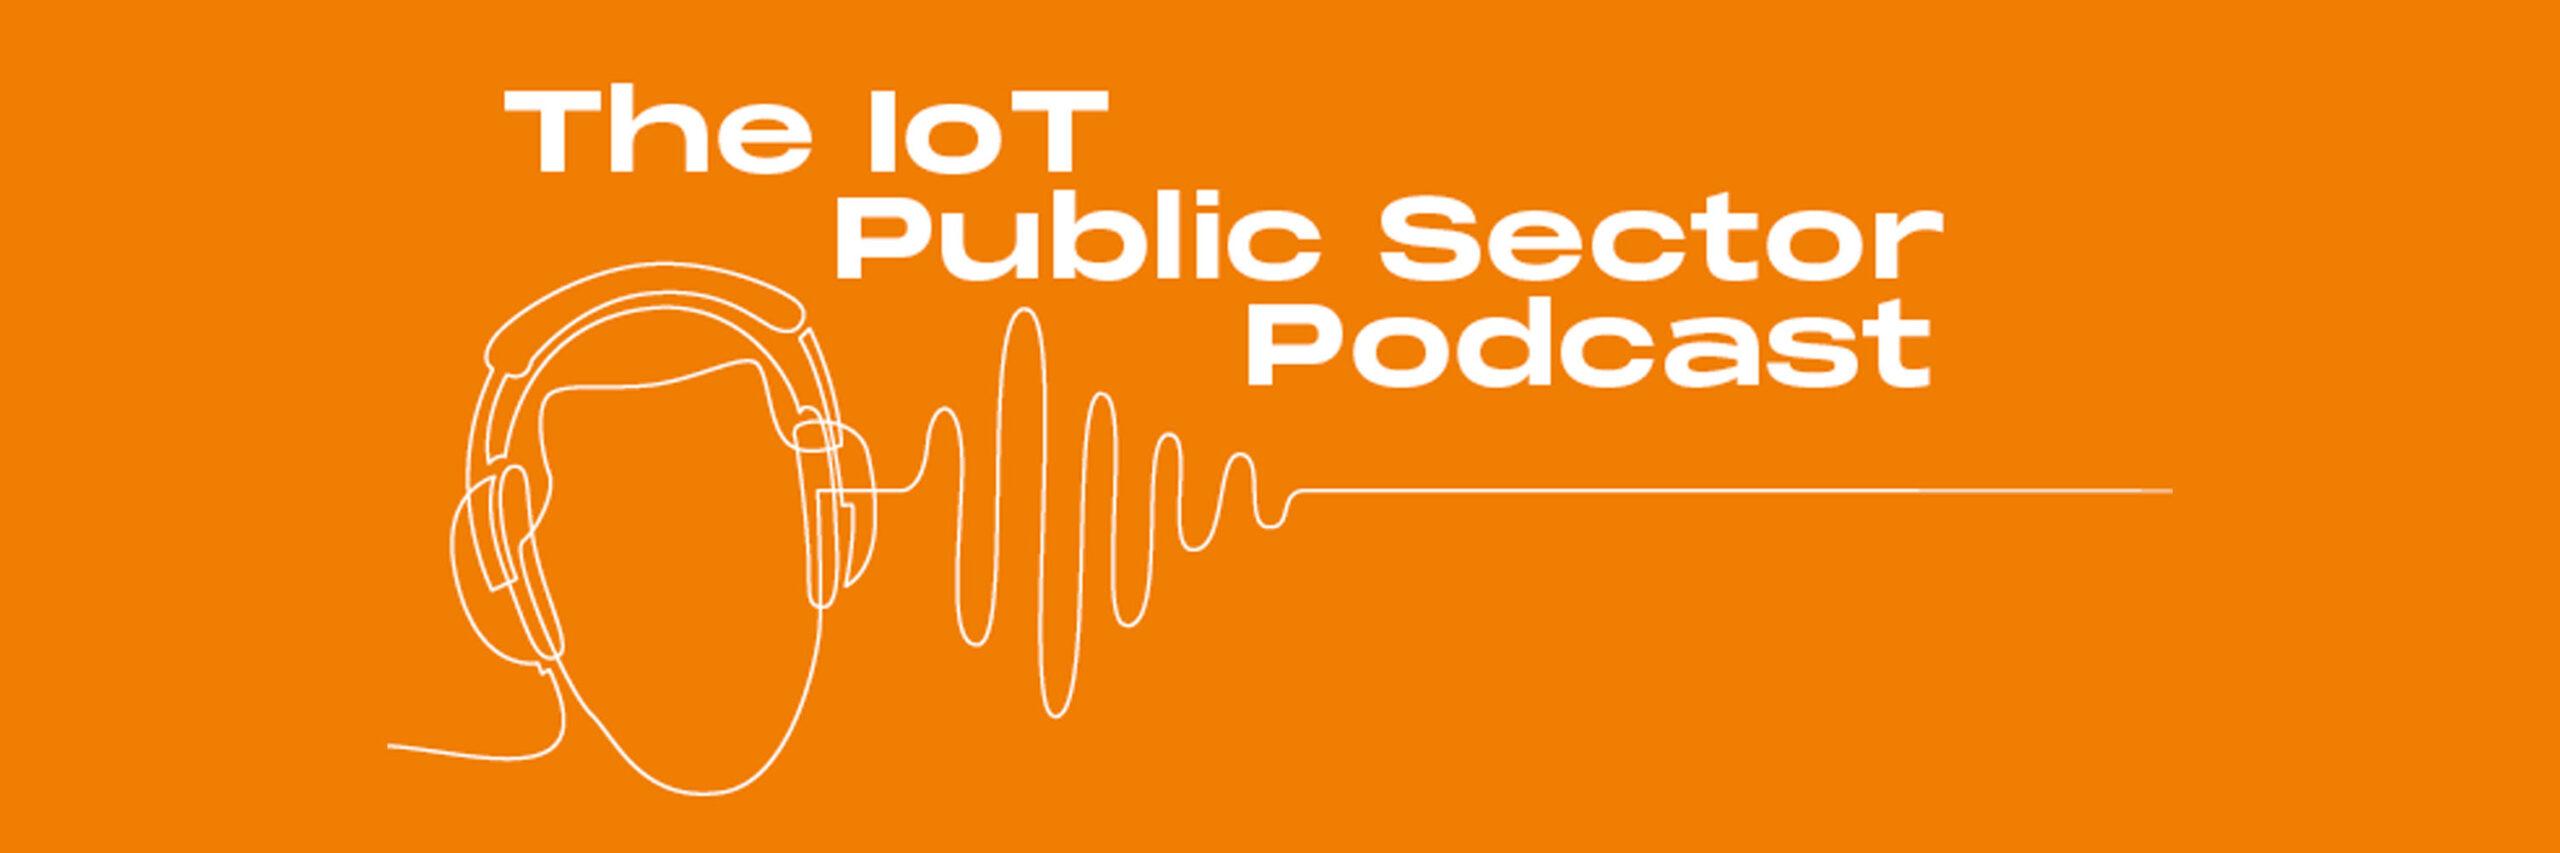 New podcast episode: Smart City Lab